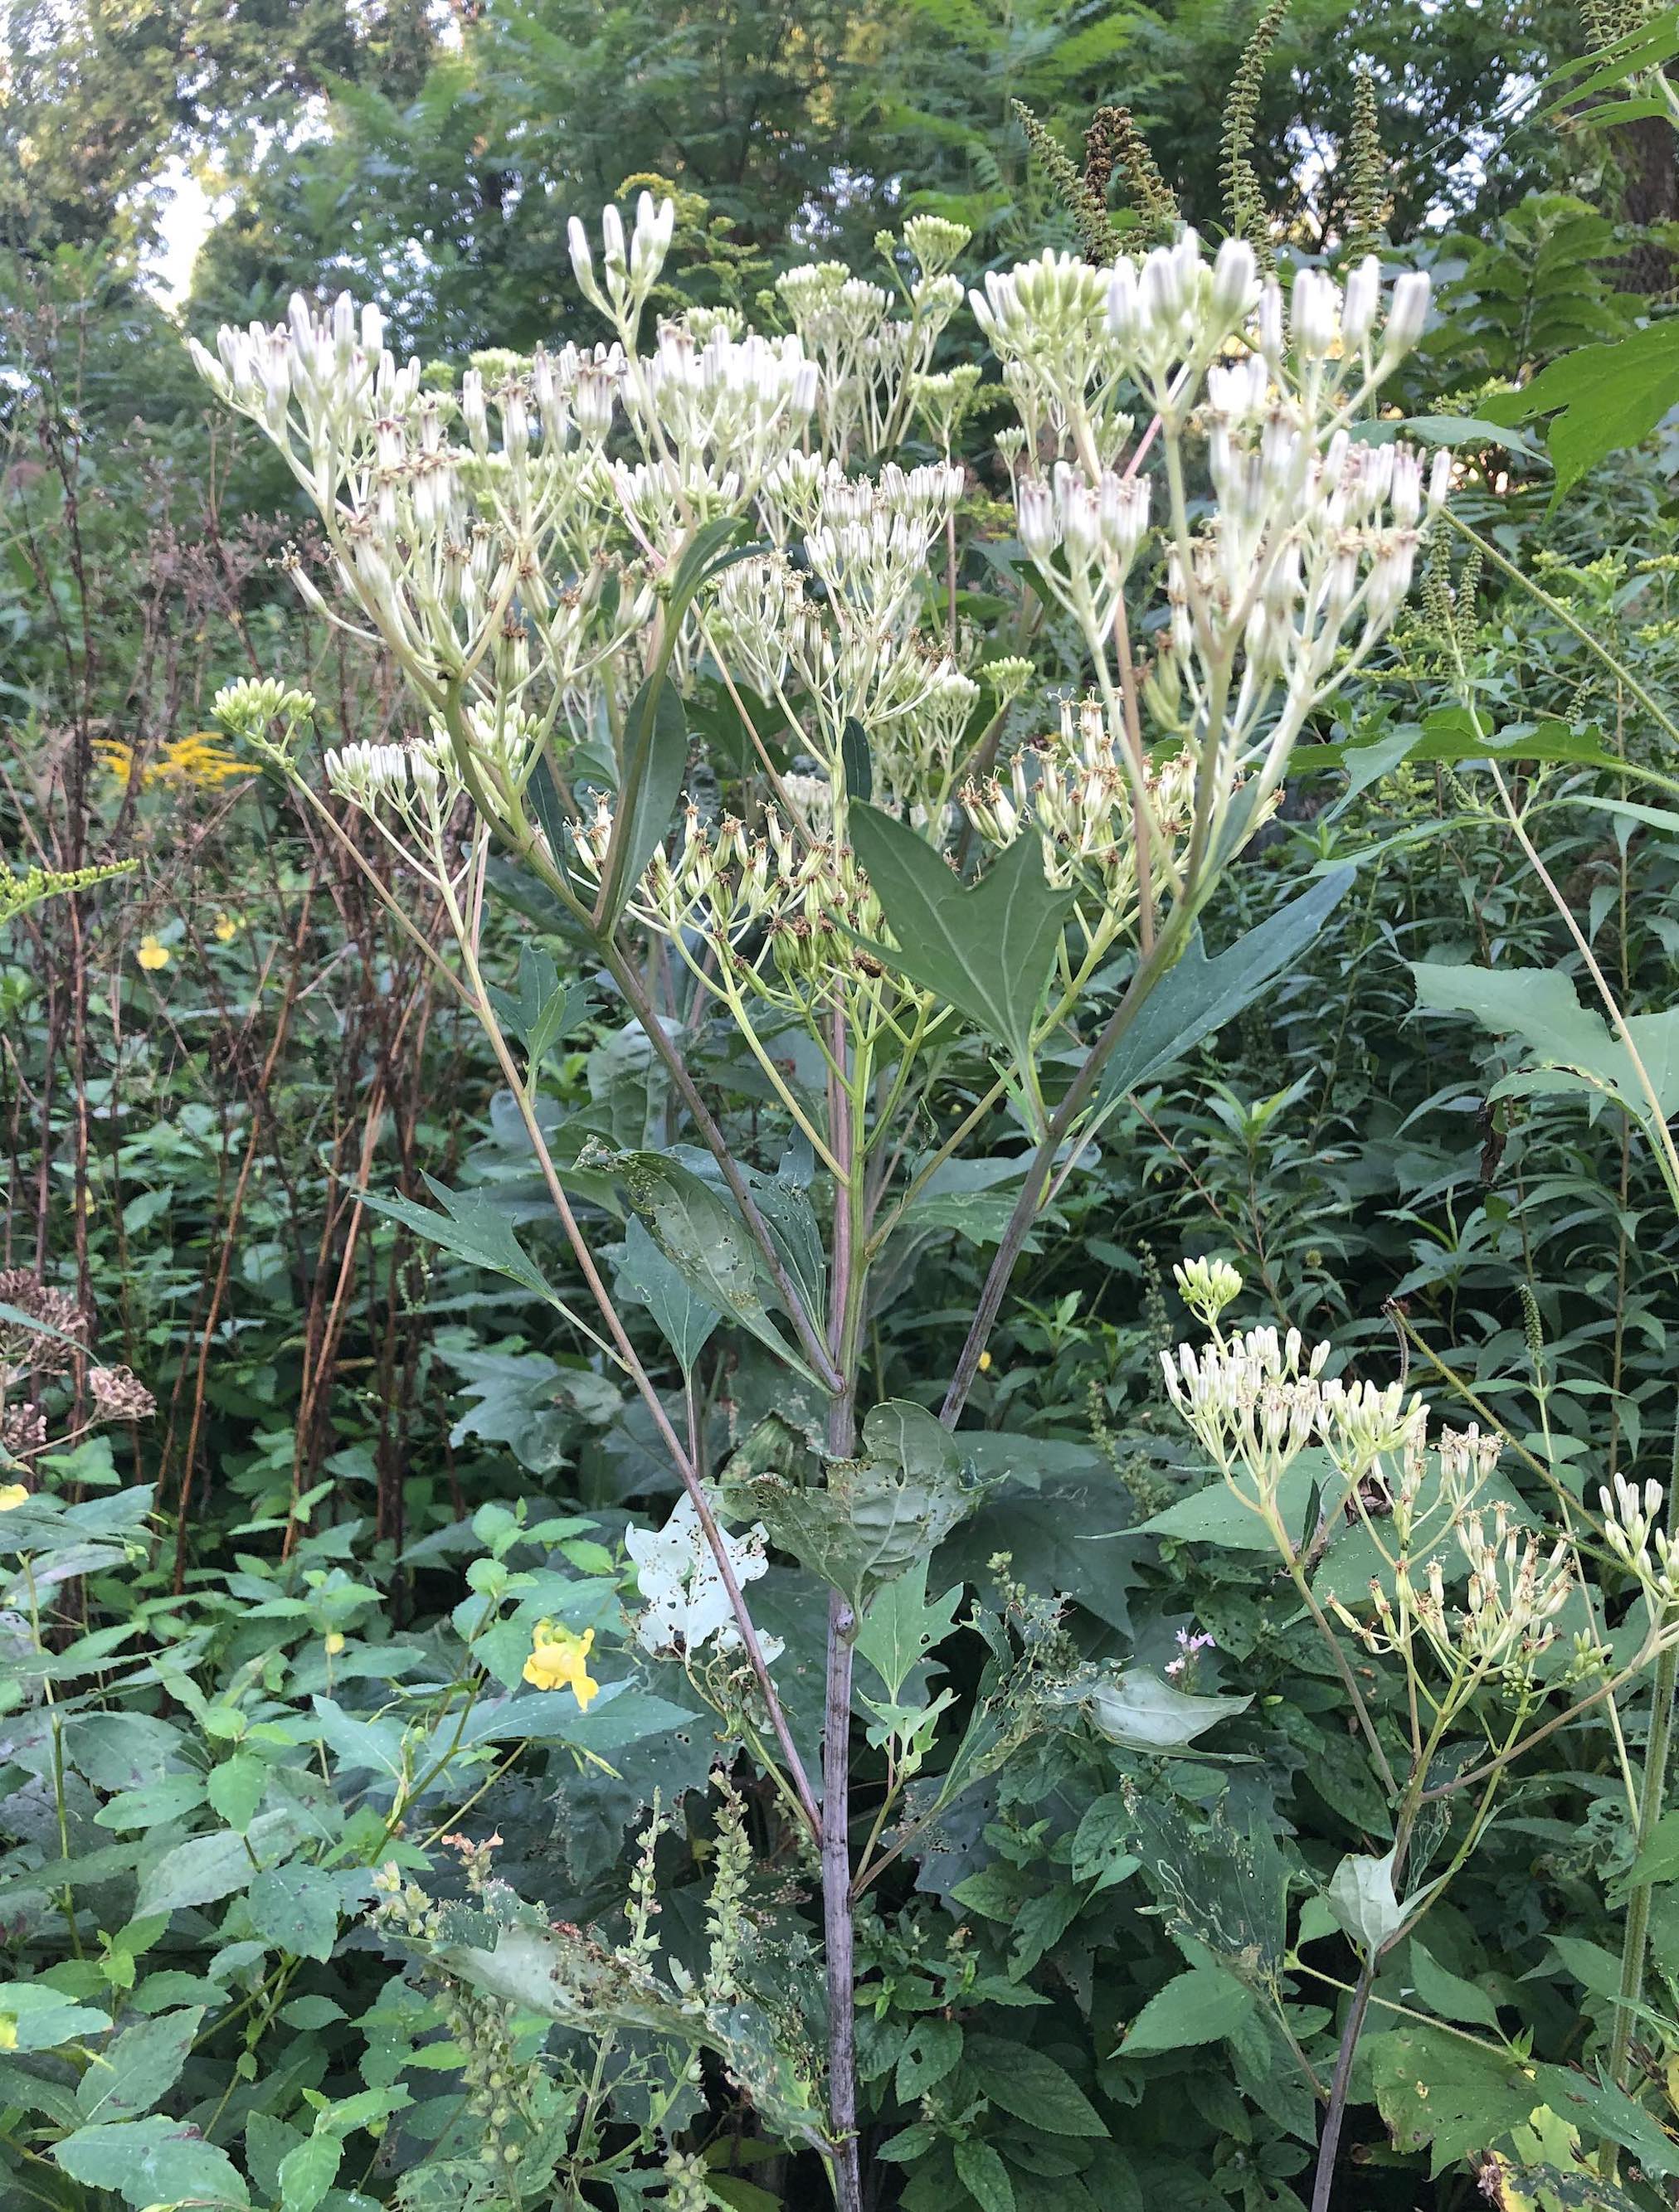 Pale Indian Plantain in Oak Savanna in Madison, Wisconsin on August 23, 2019.